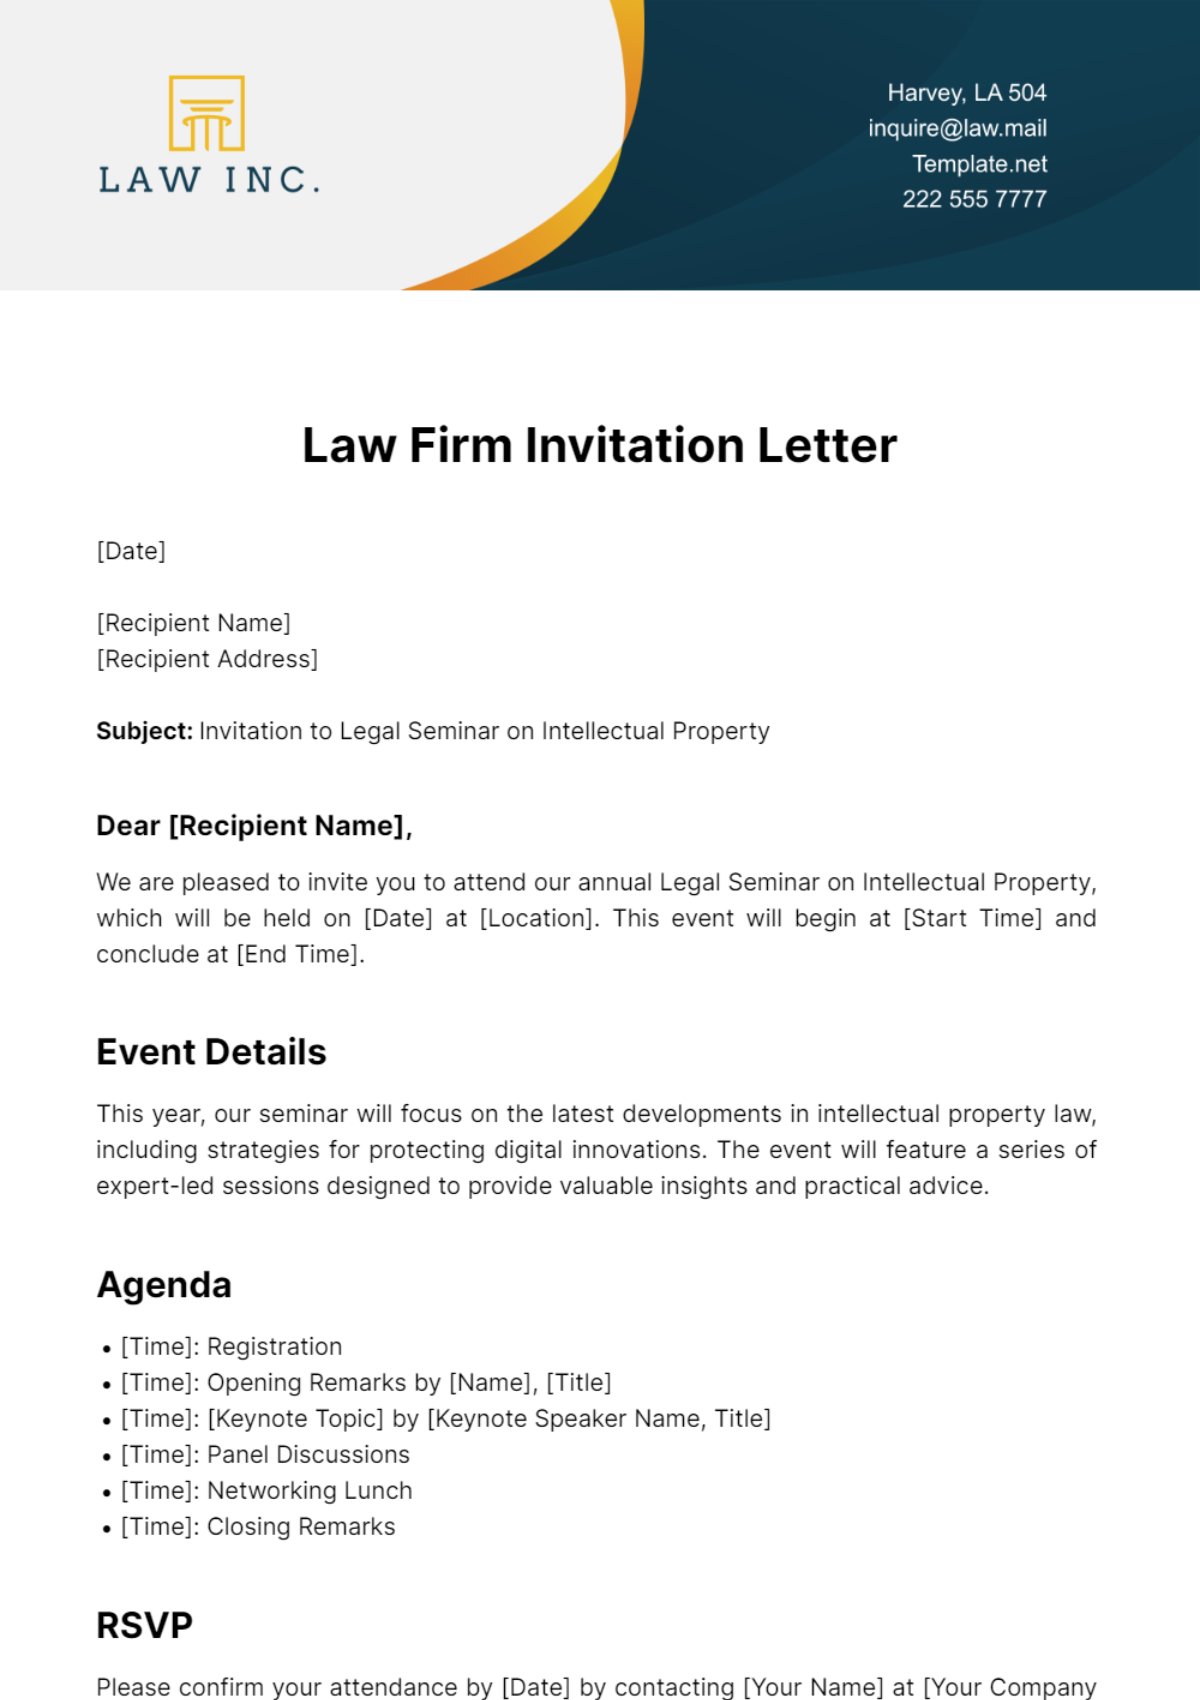 Free Law Firm Invitation Letter Template